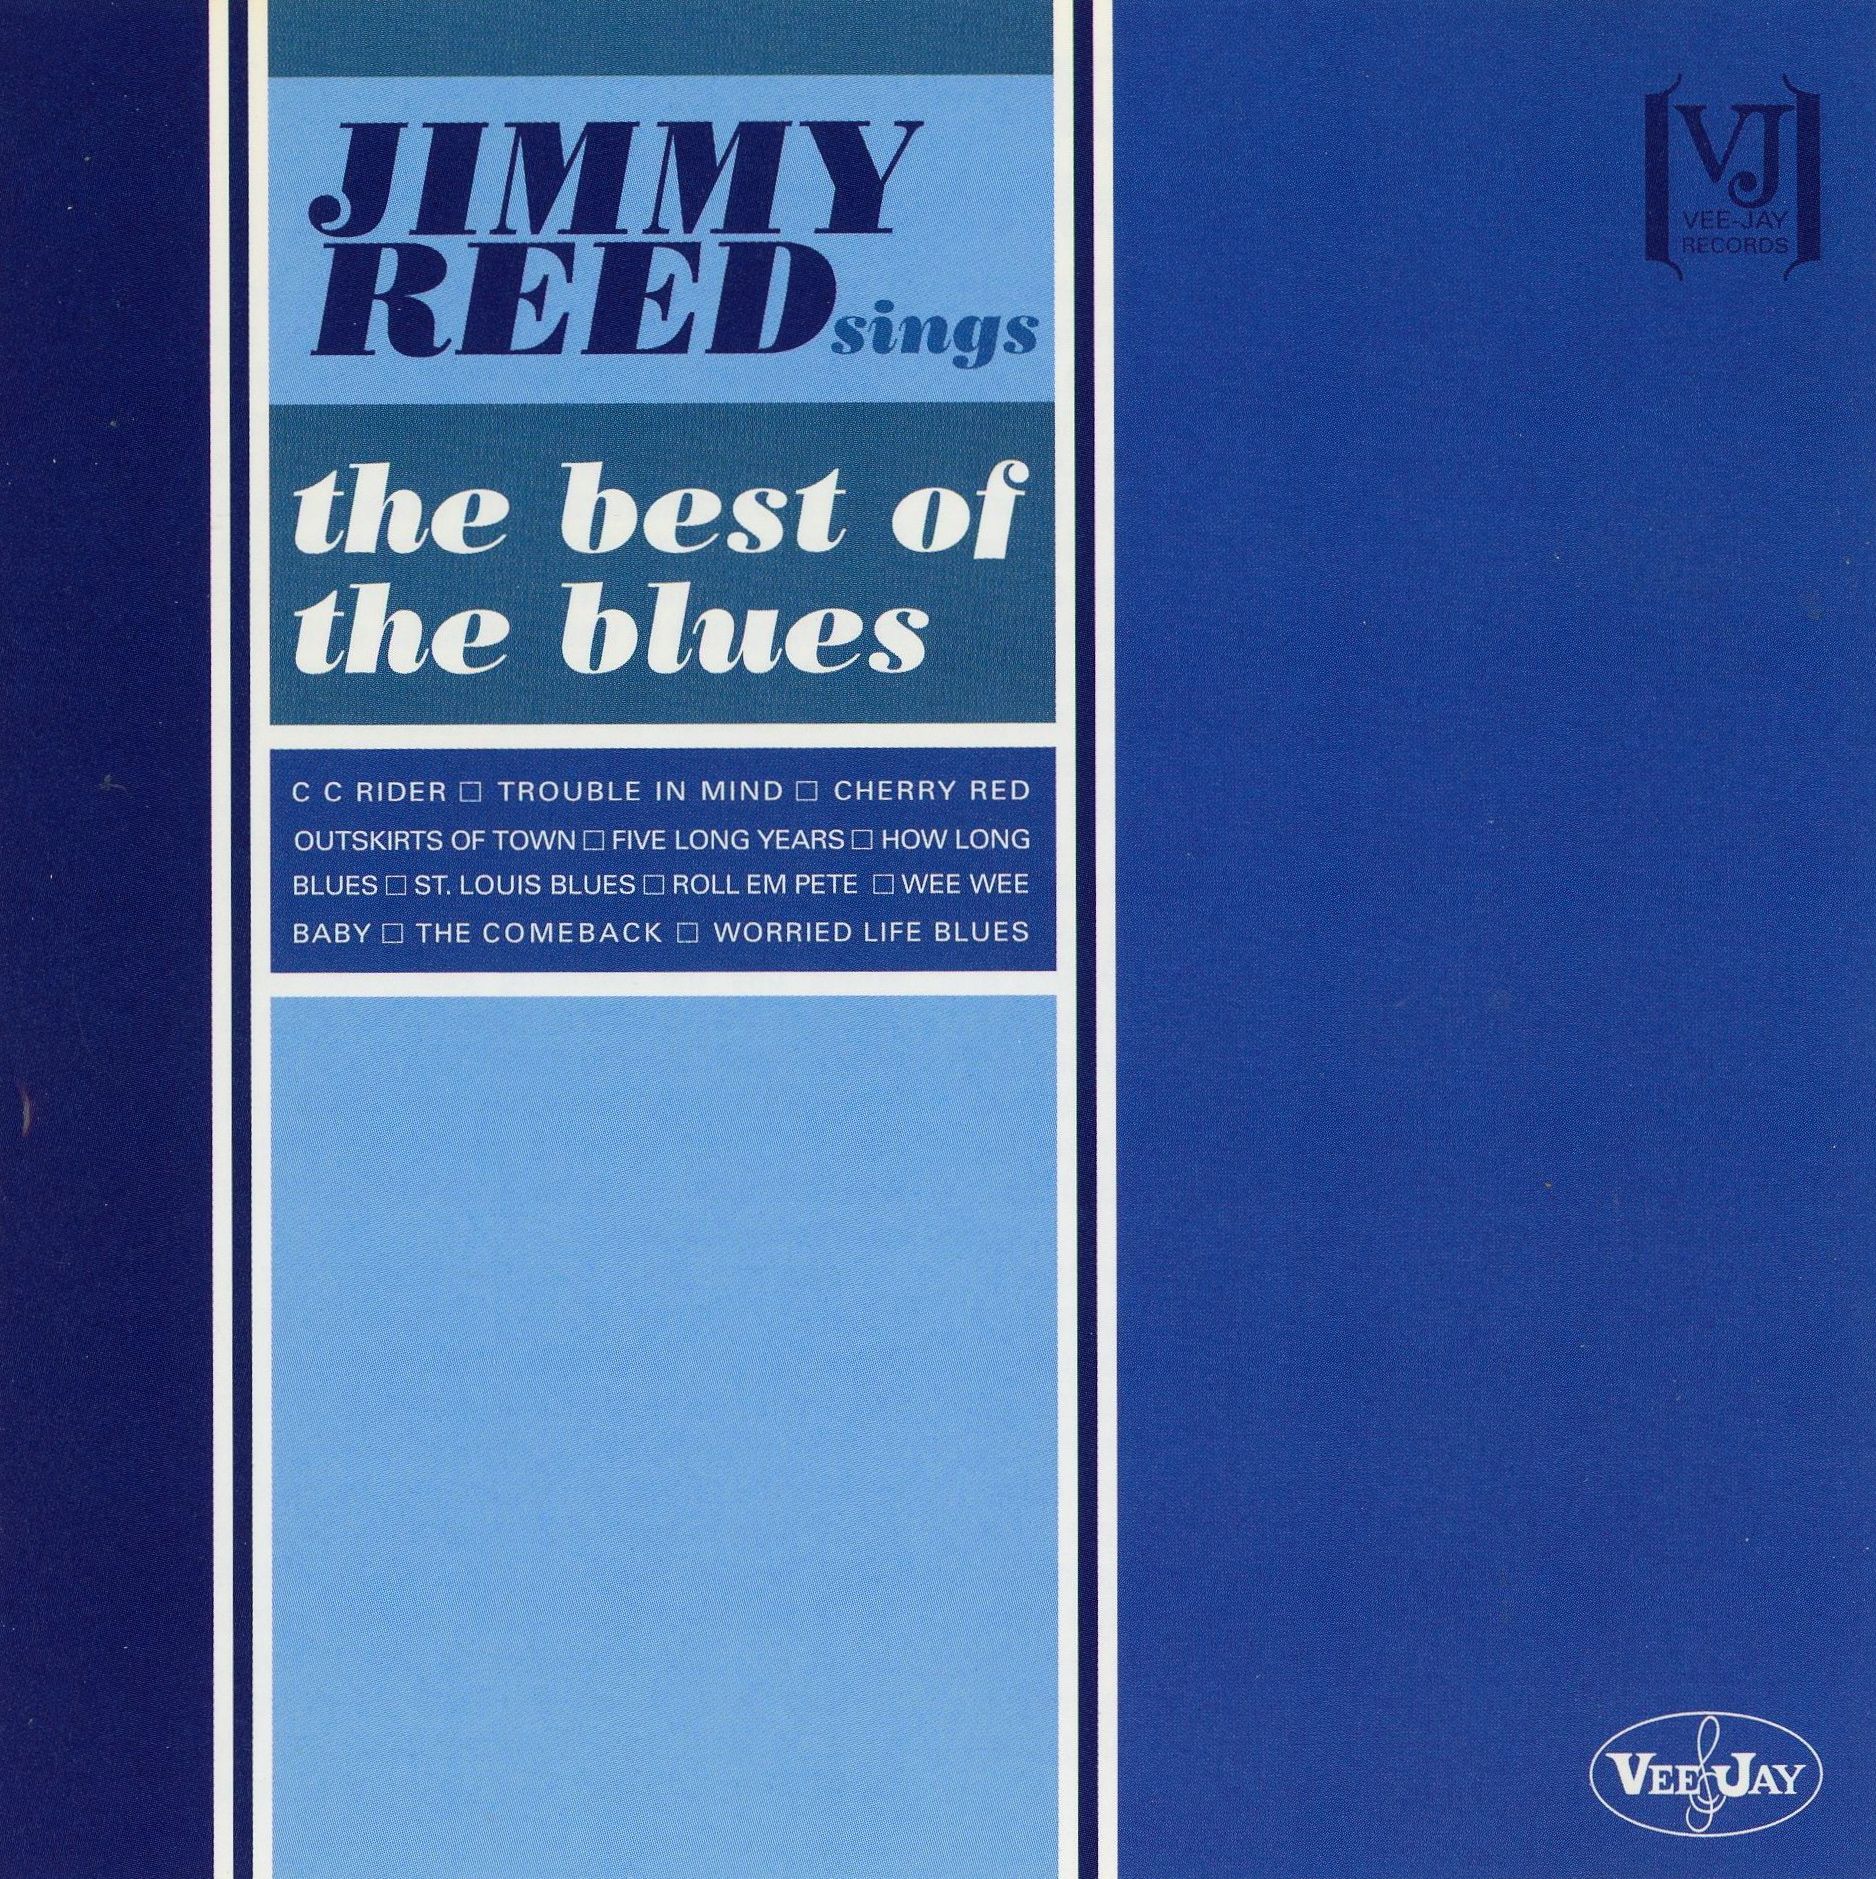 Jimmy Reed - Sings The Best Of The Blues 2007